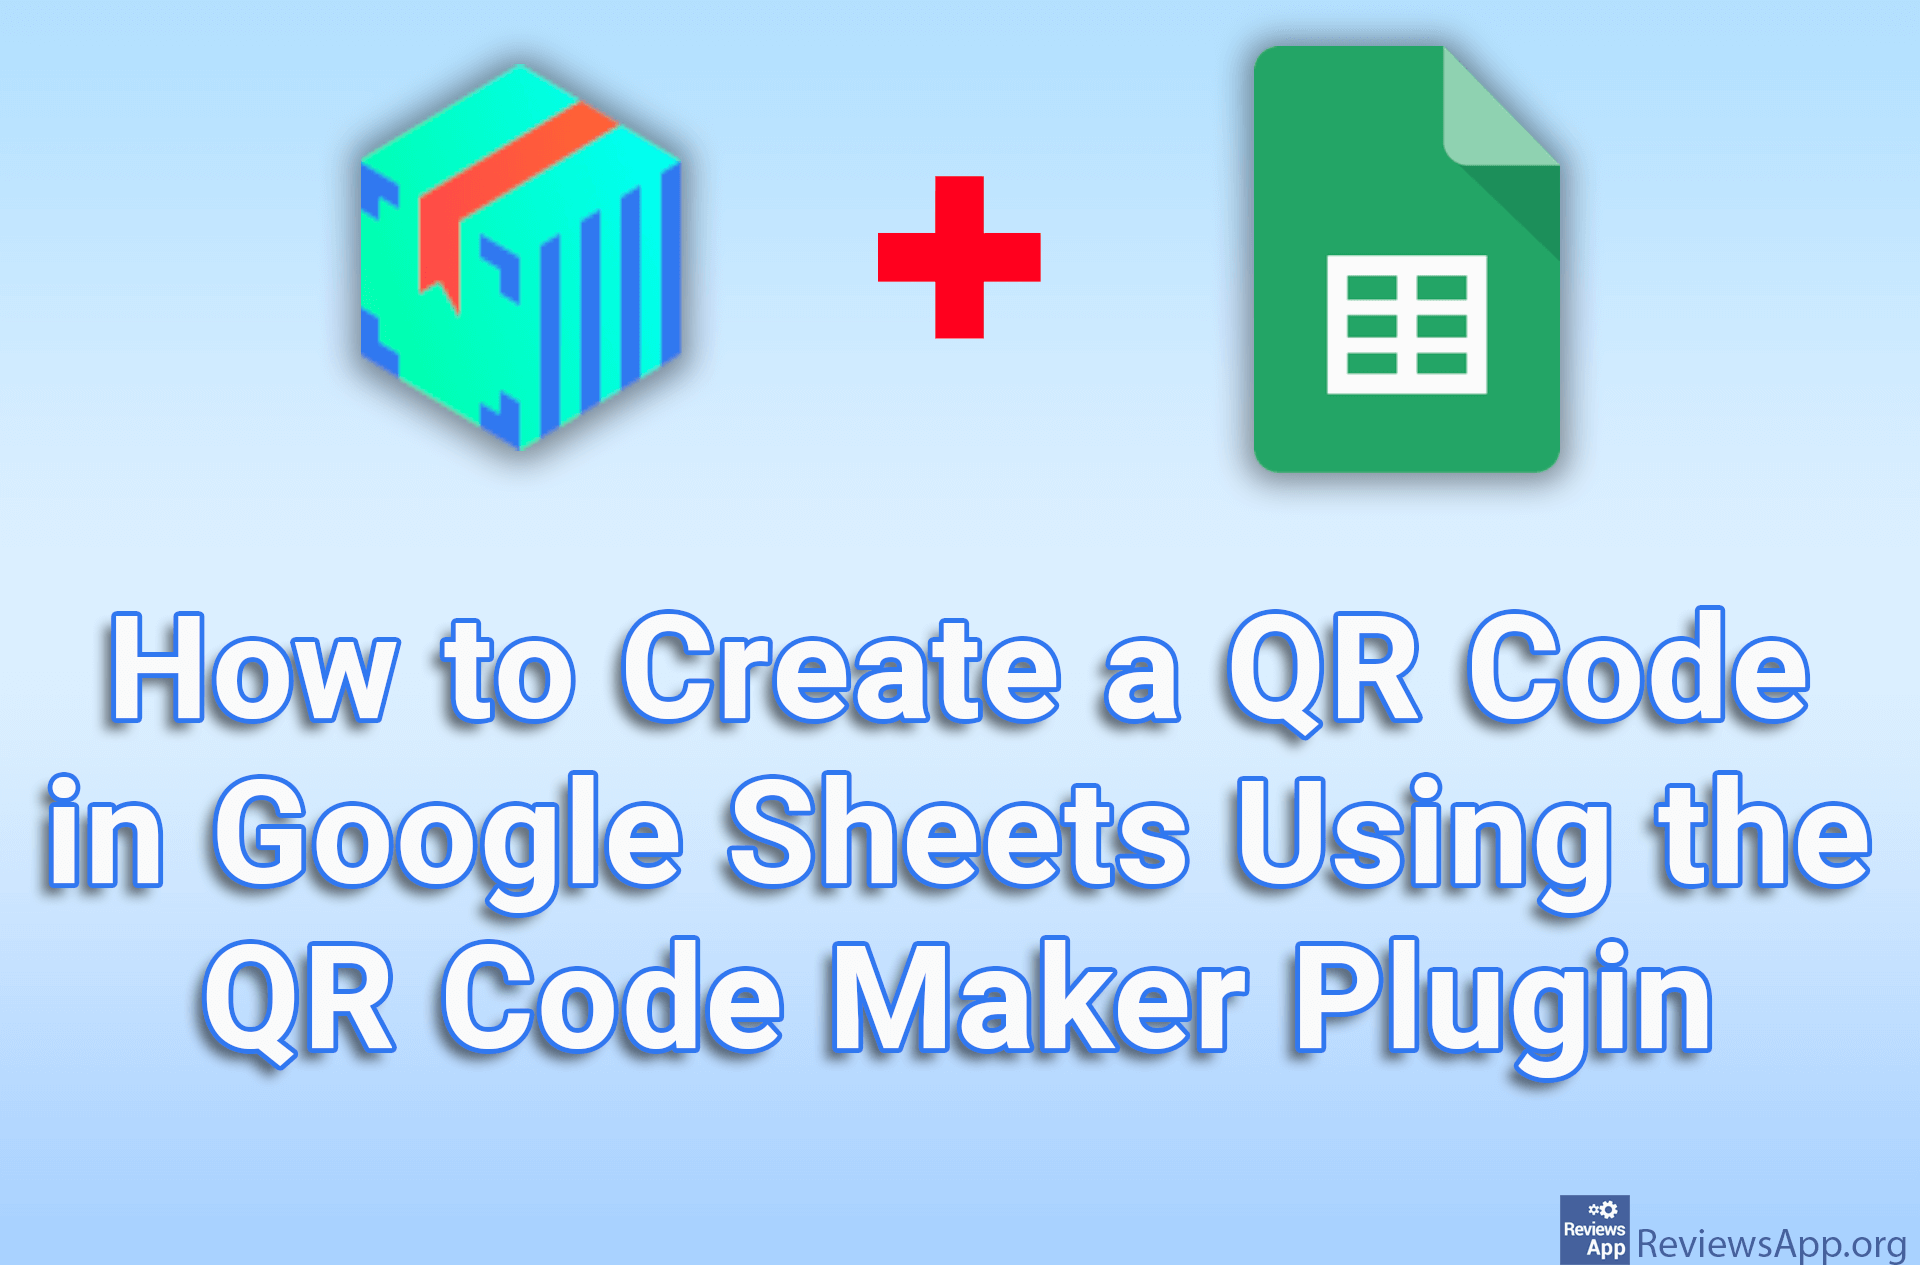 How to Create a QR Code in Google Sheets Using the QR Code Maker Plugin